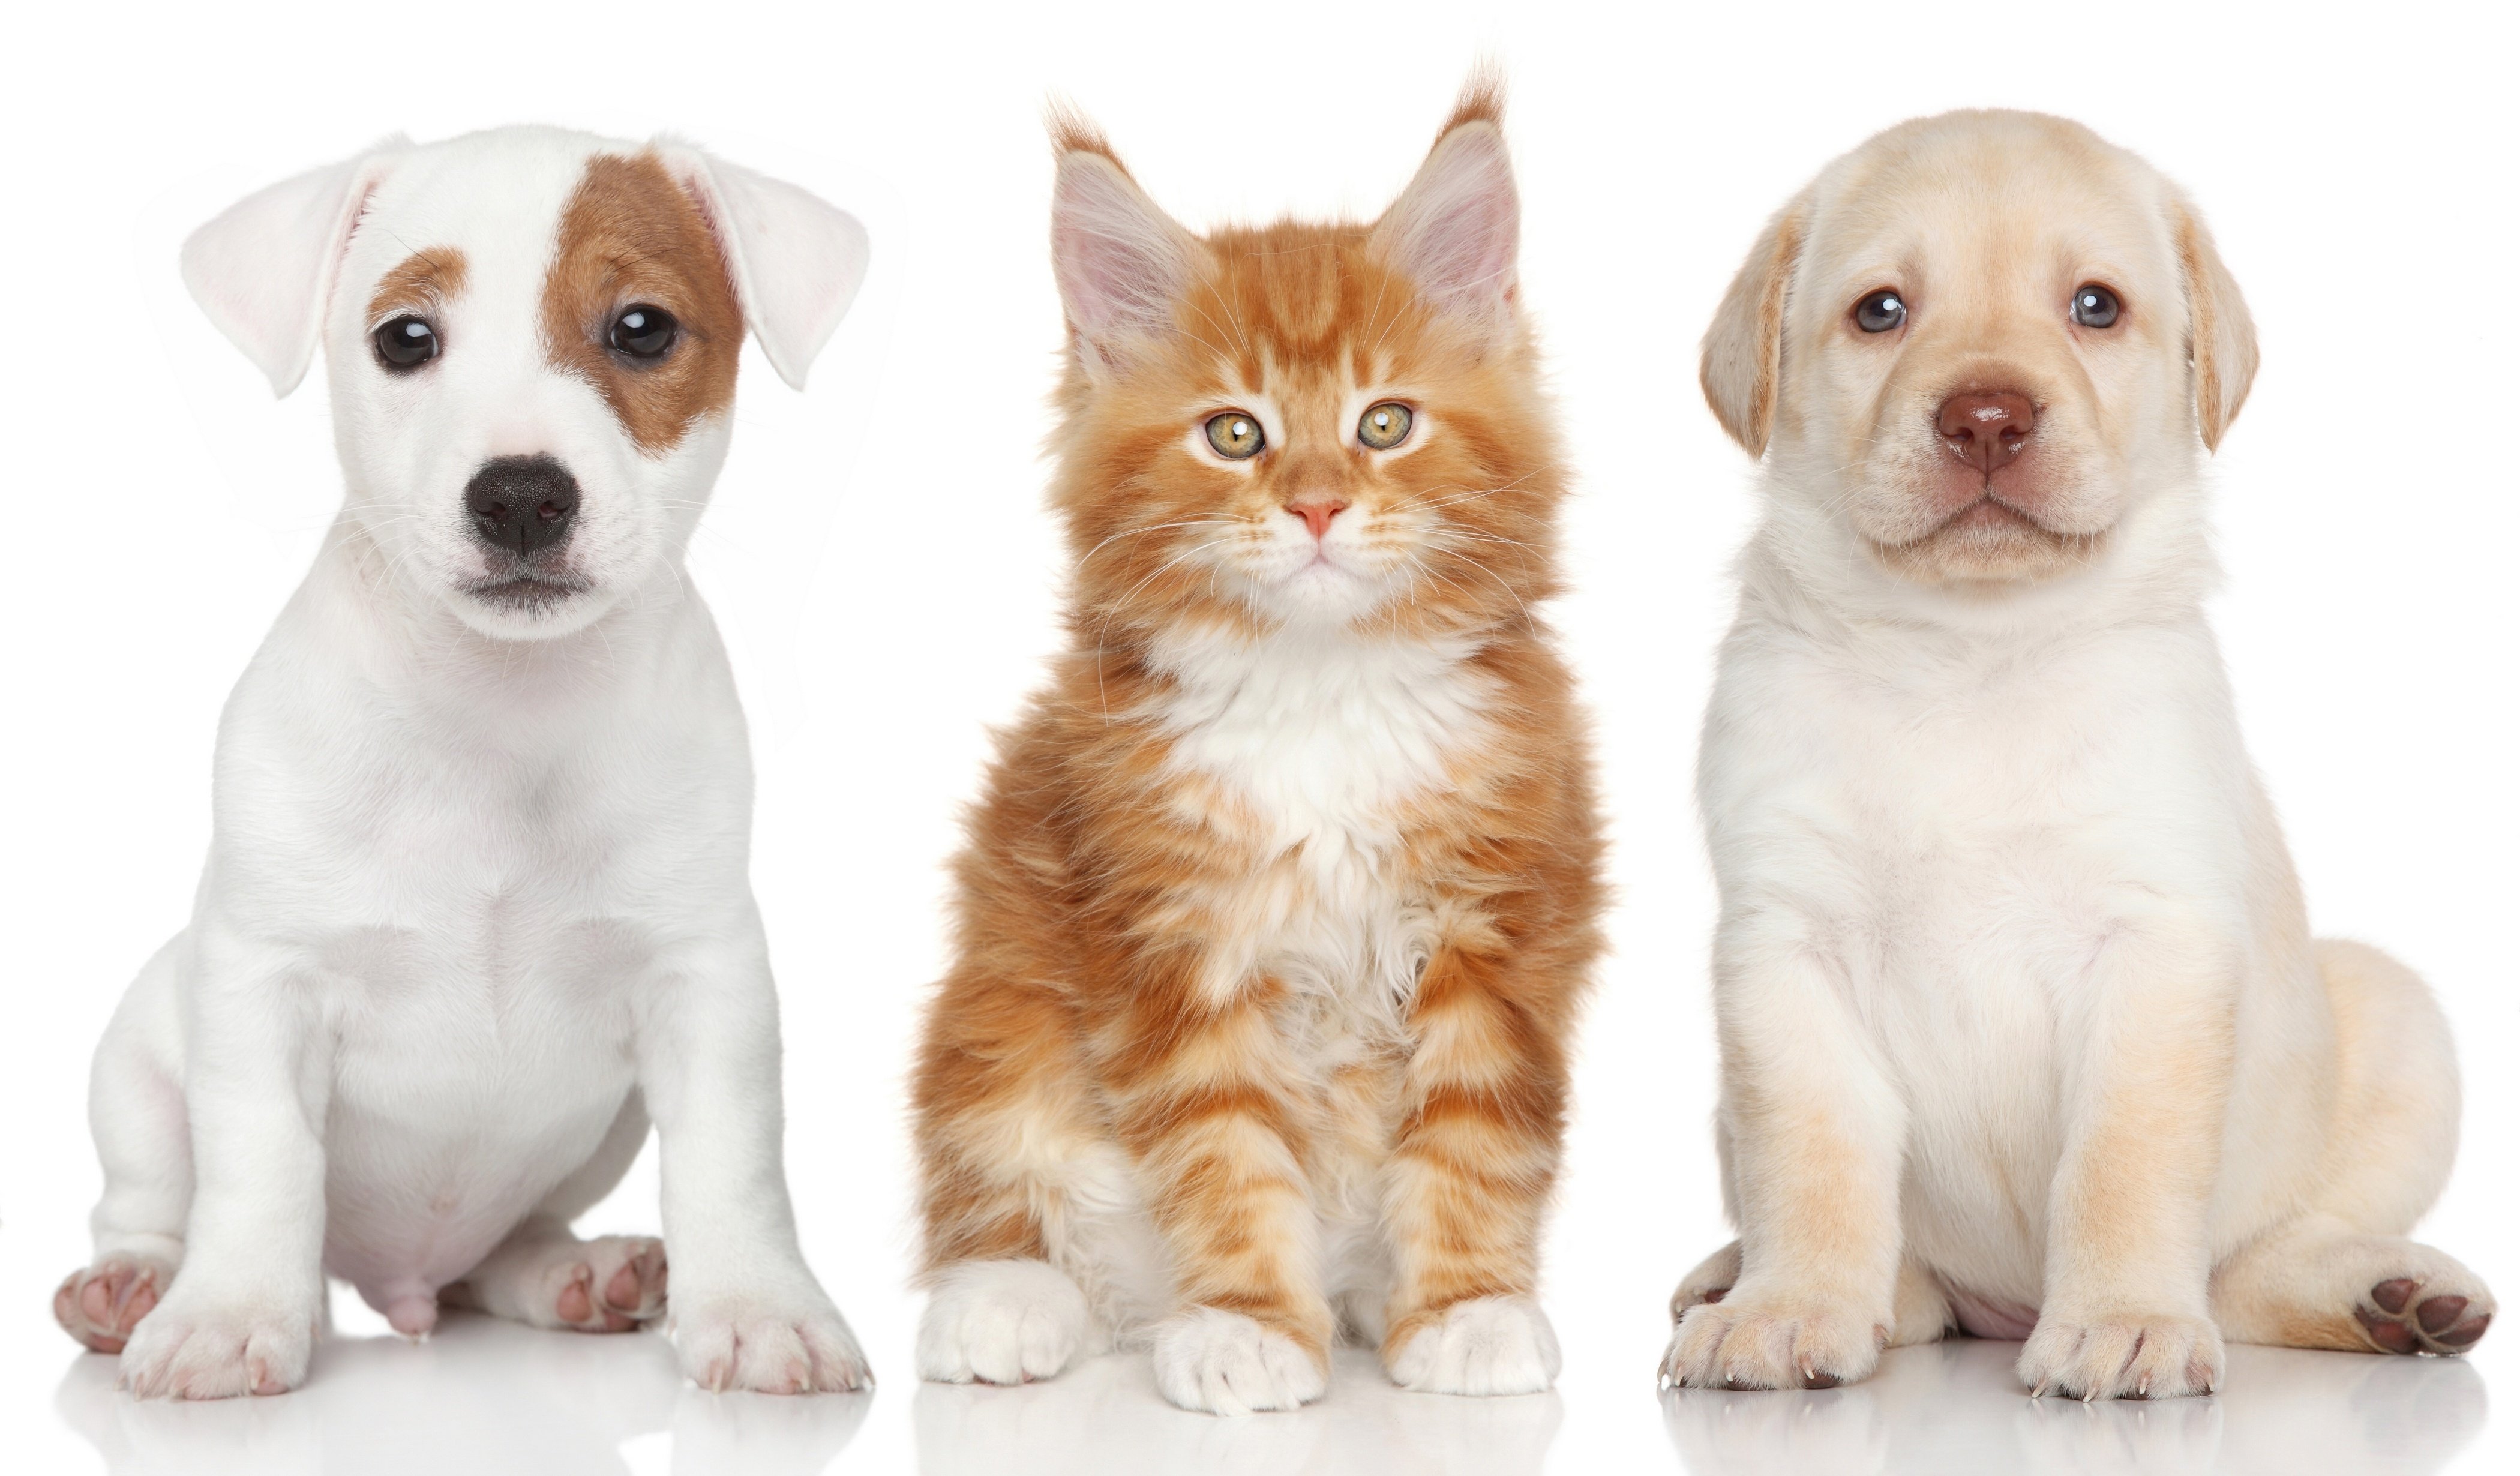 cat-and-dog-wallpapers-high-quality-download-free